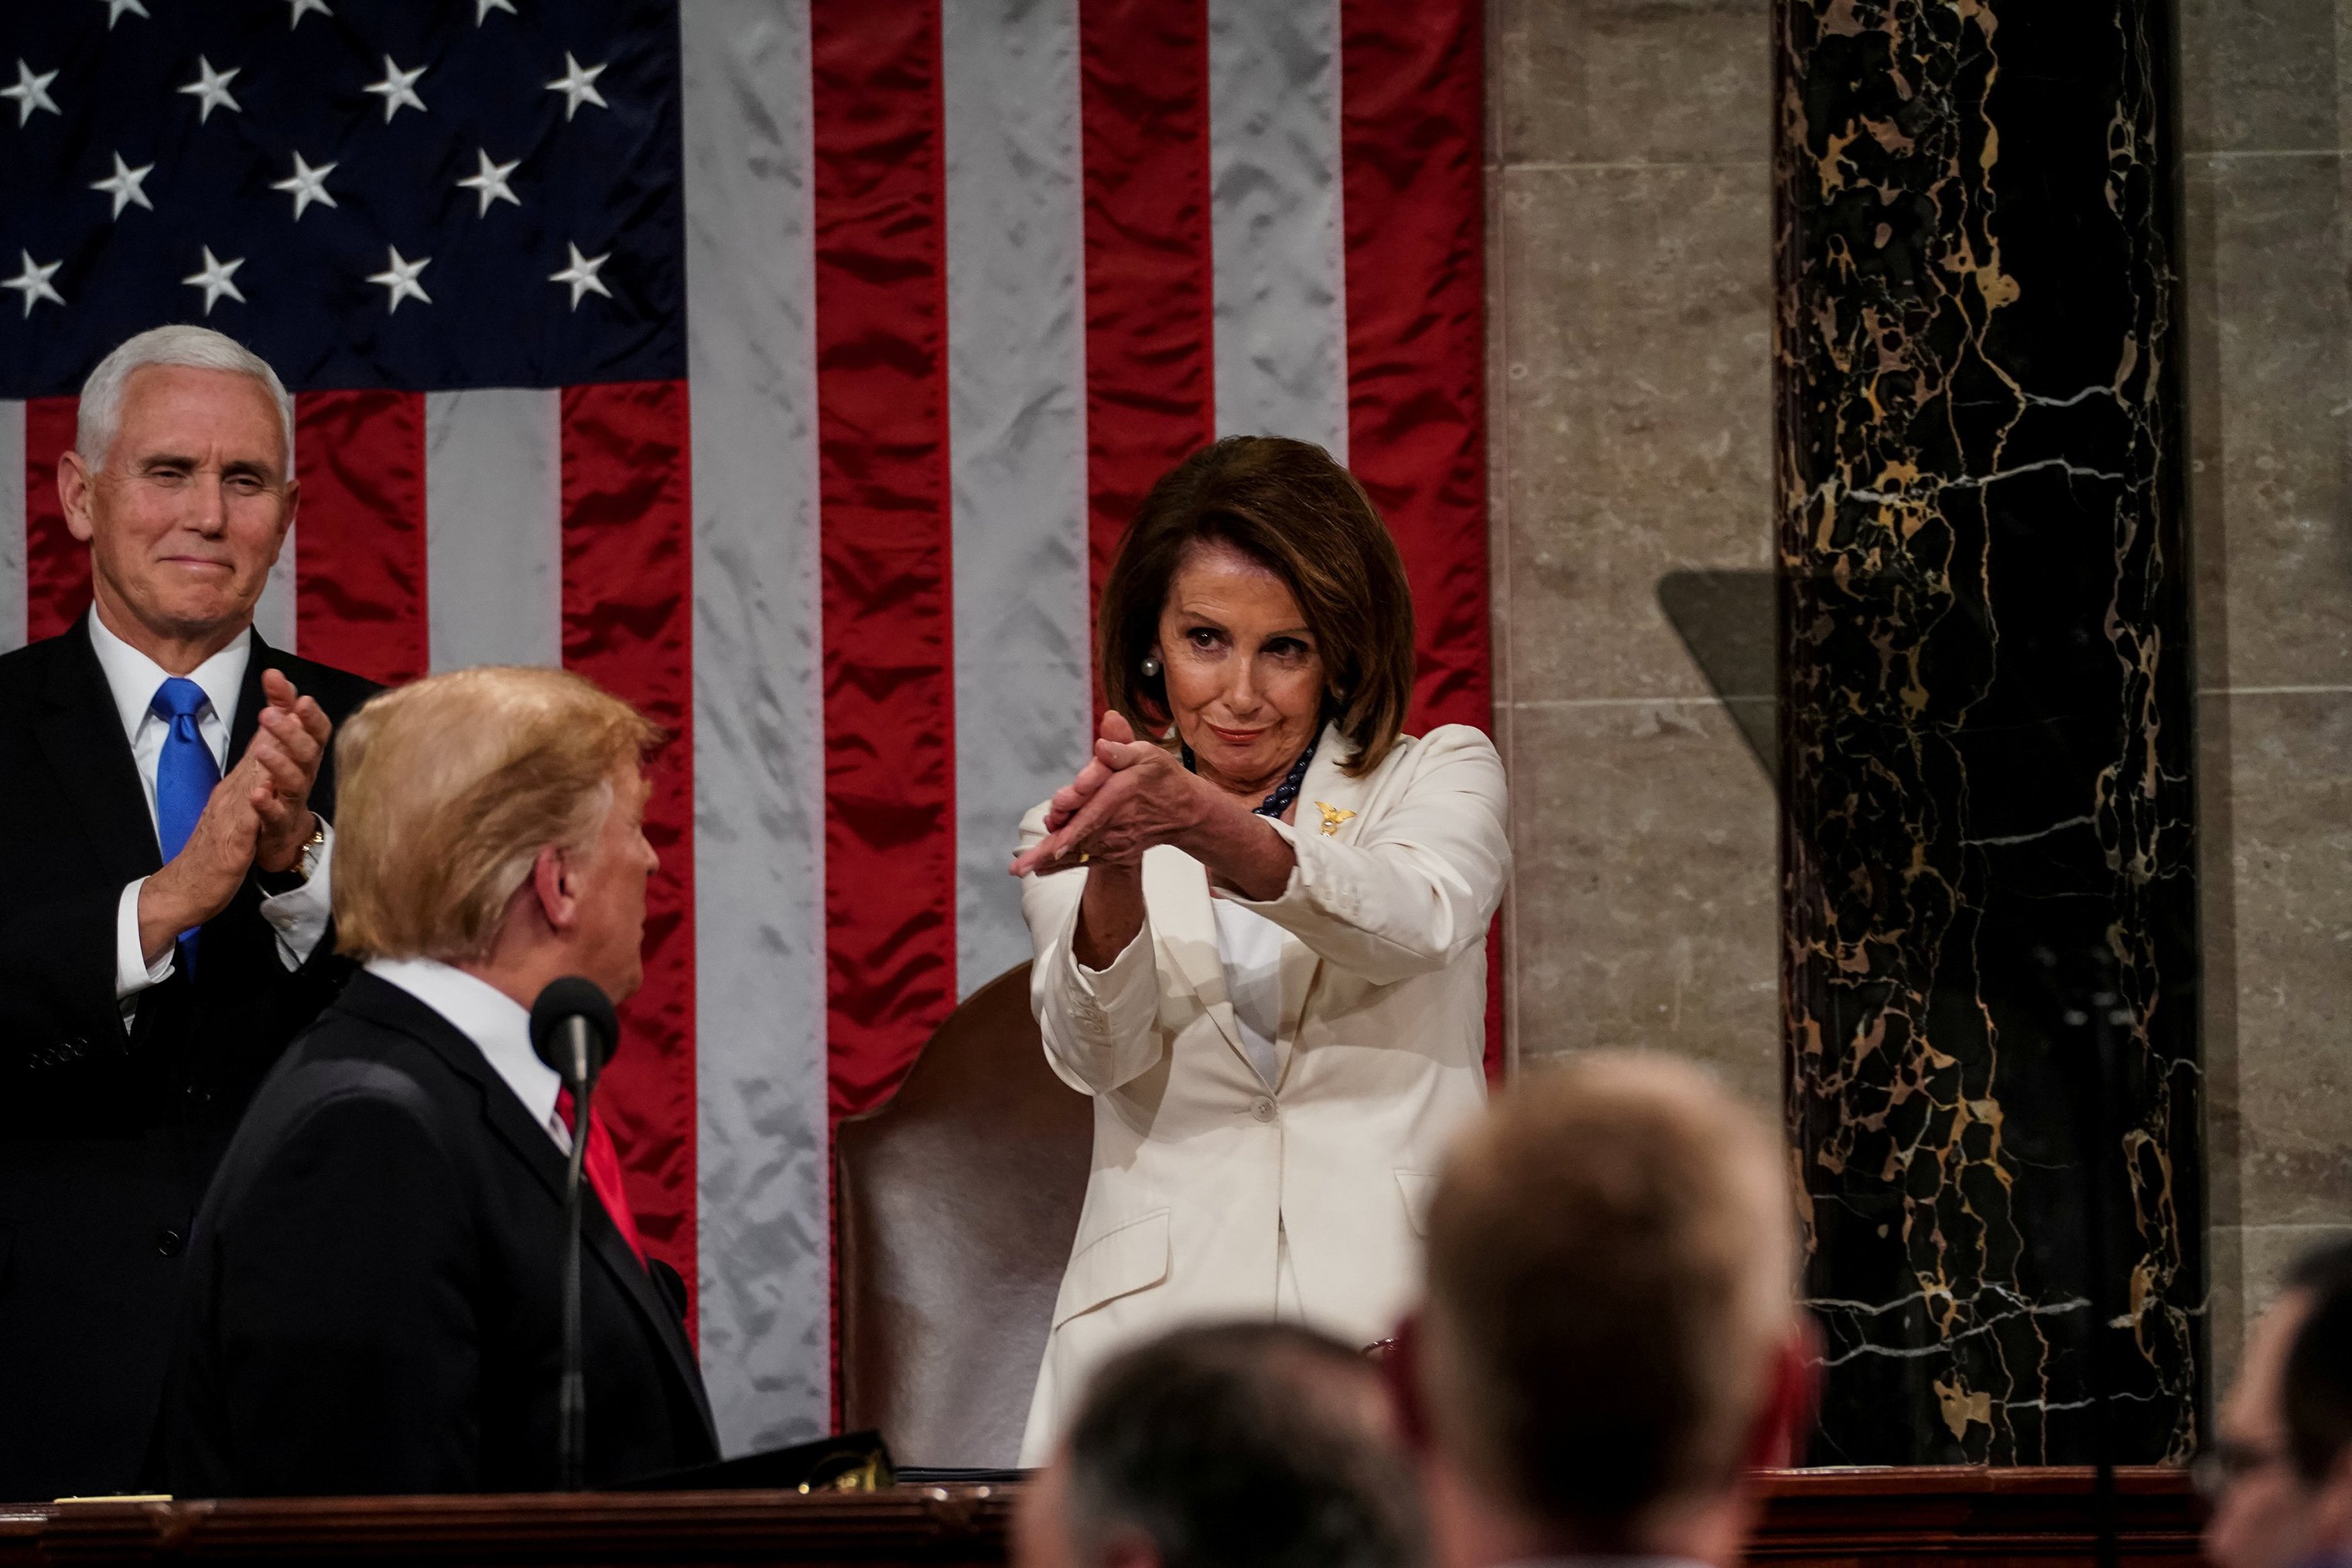 Chatting the Pictures: Pelosi’s Trump Clap; Double Border Fences; Male Super Bowl Cheerleaders